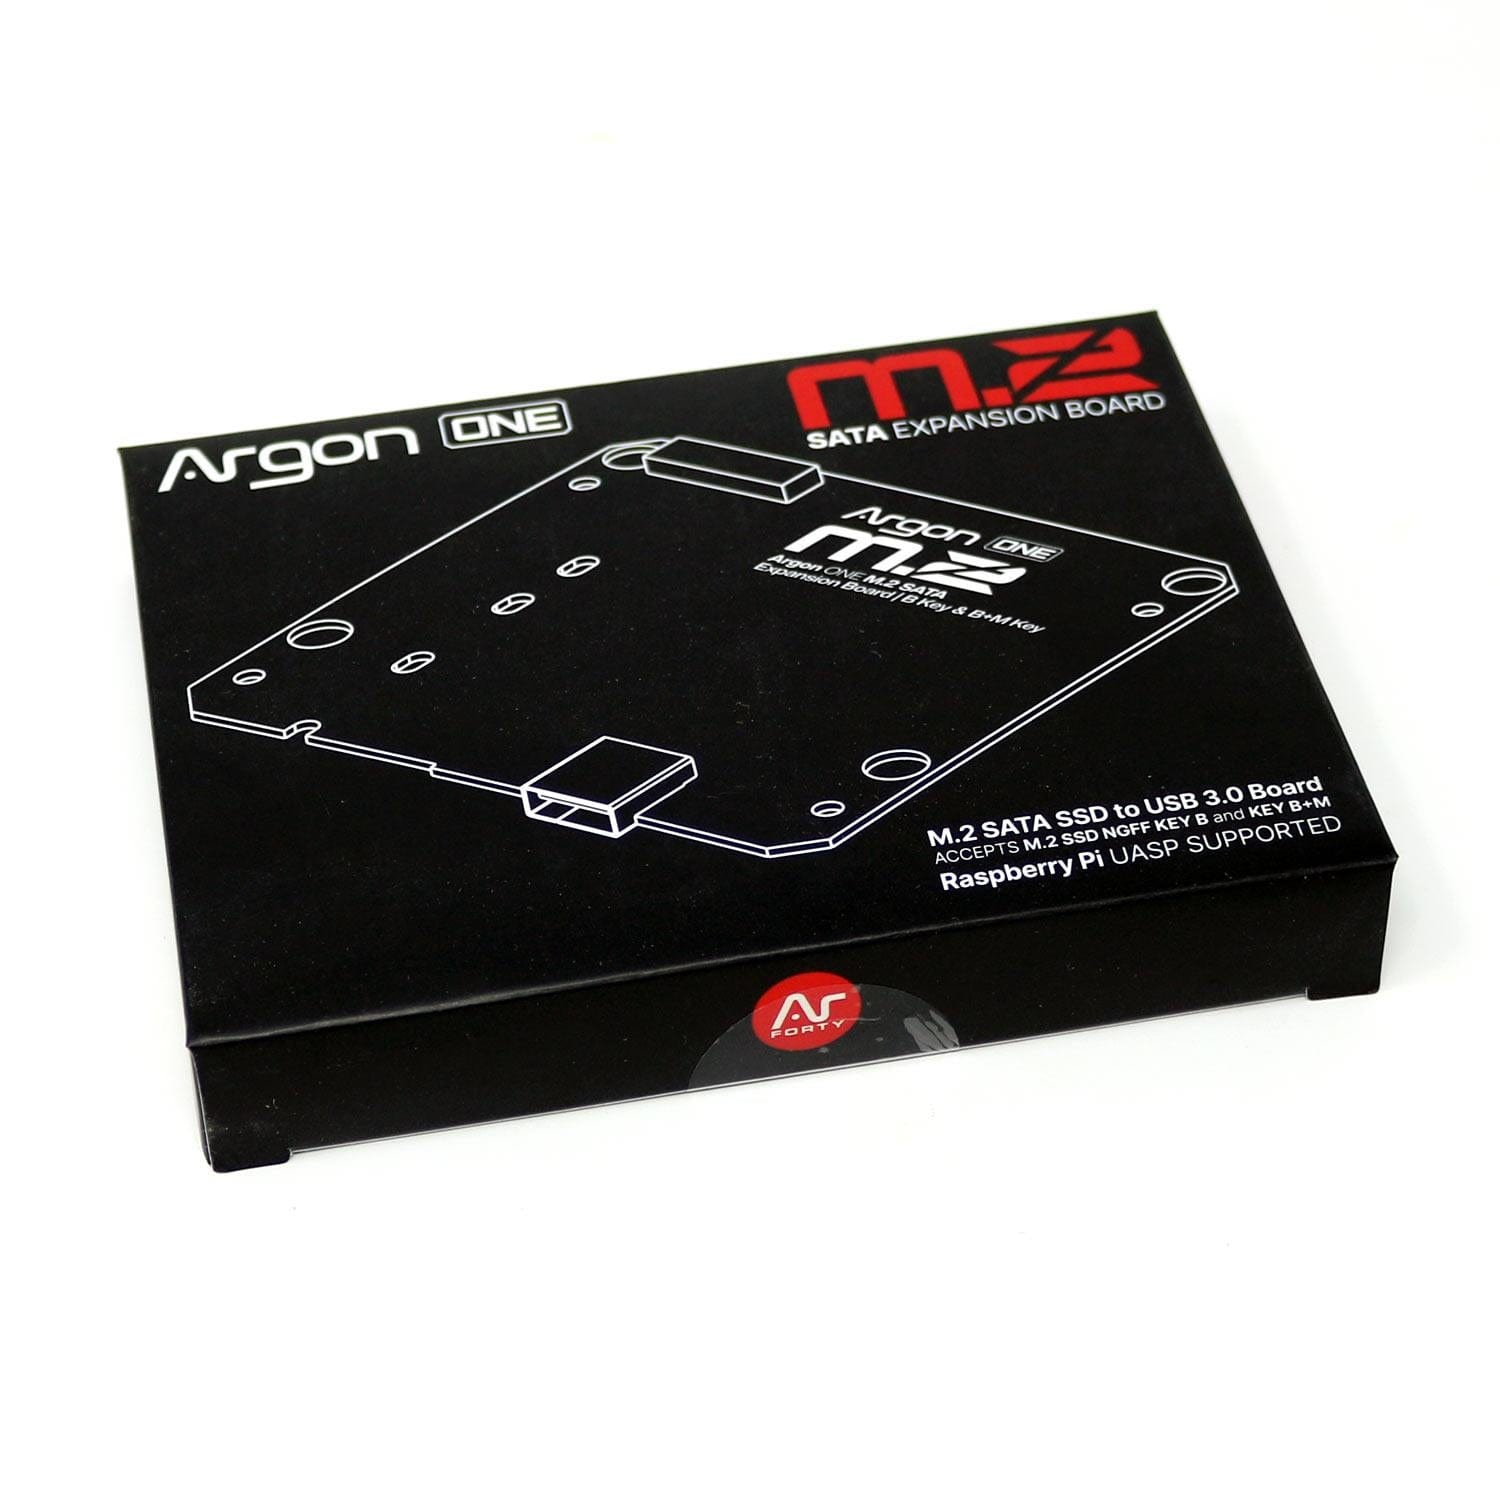 M.2 Expansion Board for Argon ONE - The Pi Hut